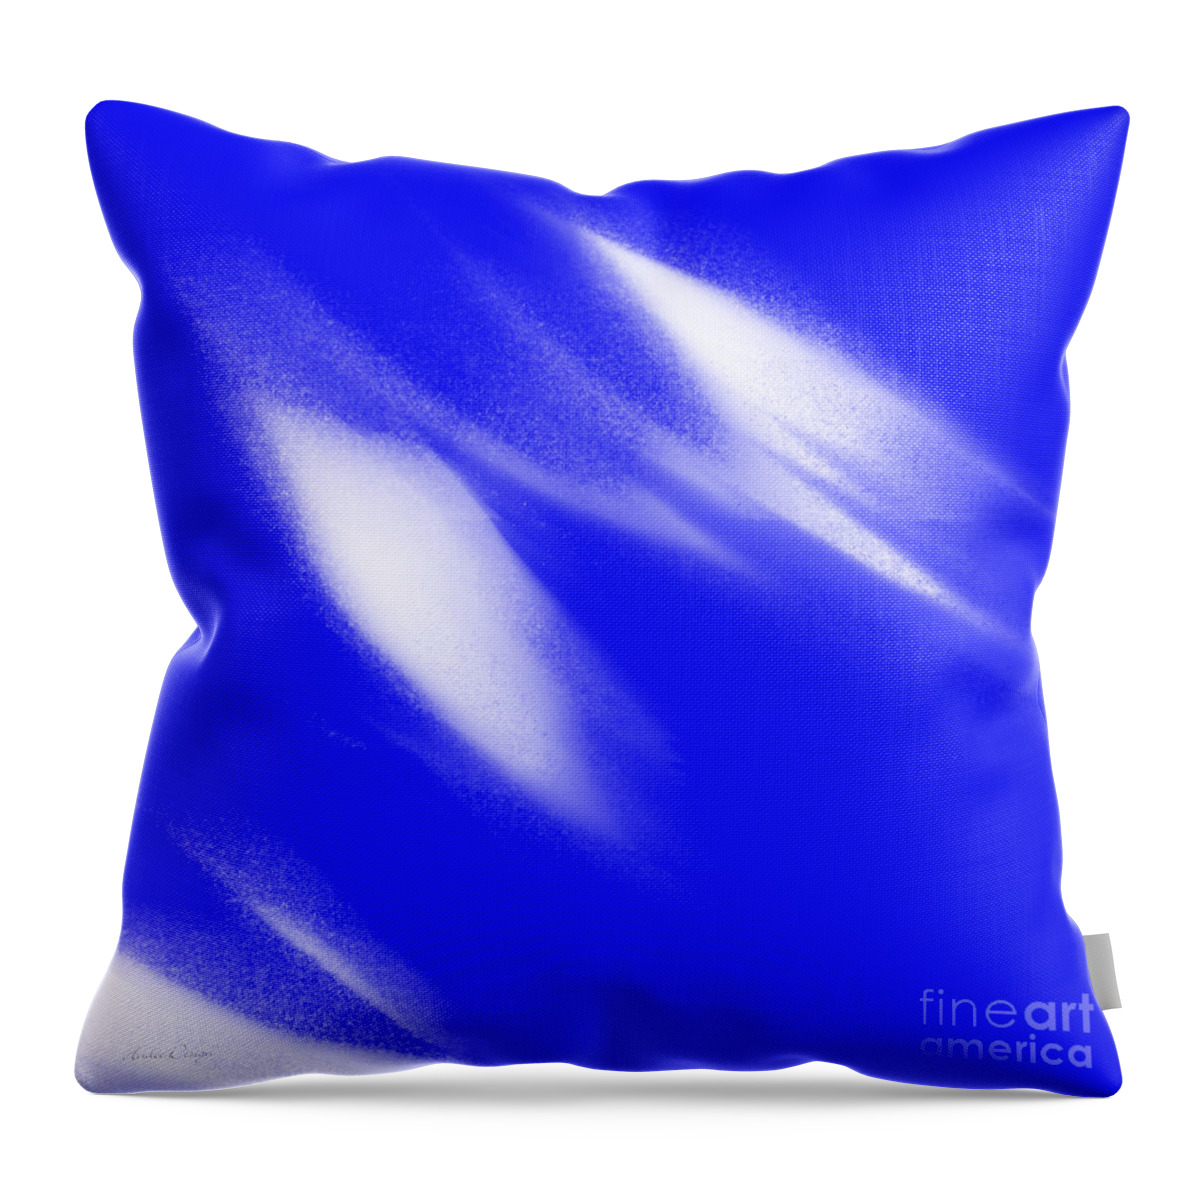 Andee Design Abstract Throw Pillow featuring the digital art Doves In Flight Abstract Square by Andee Design